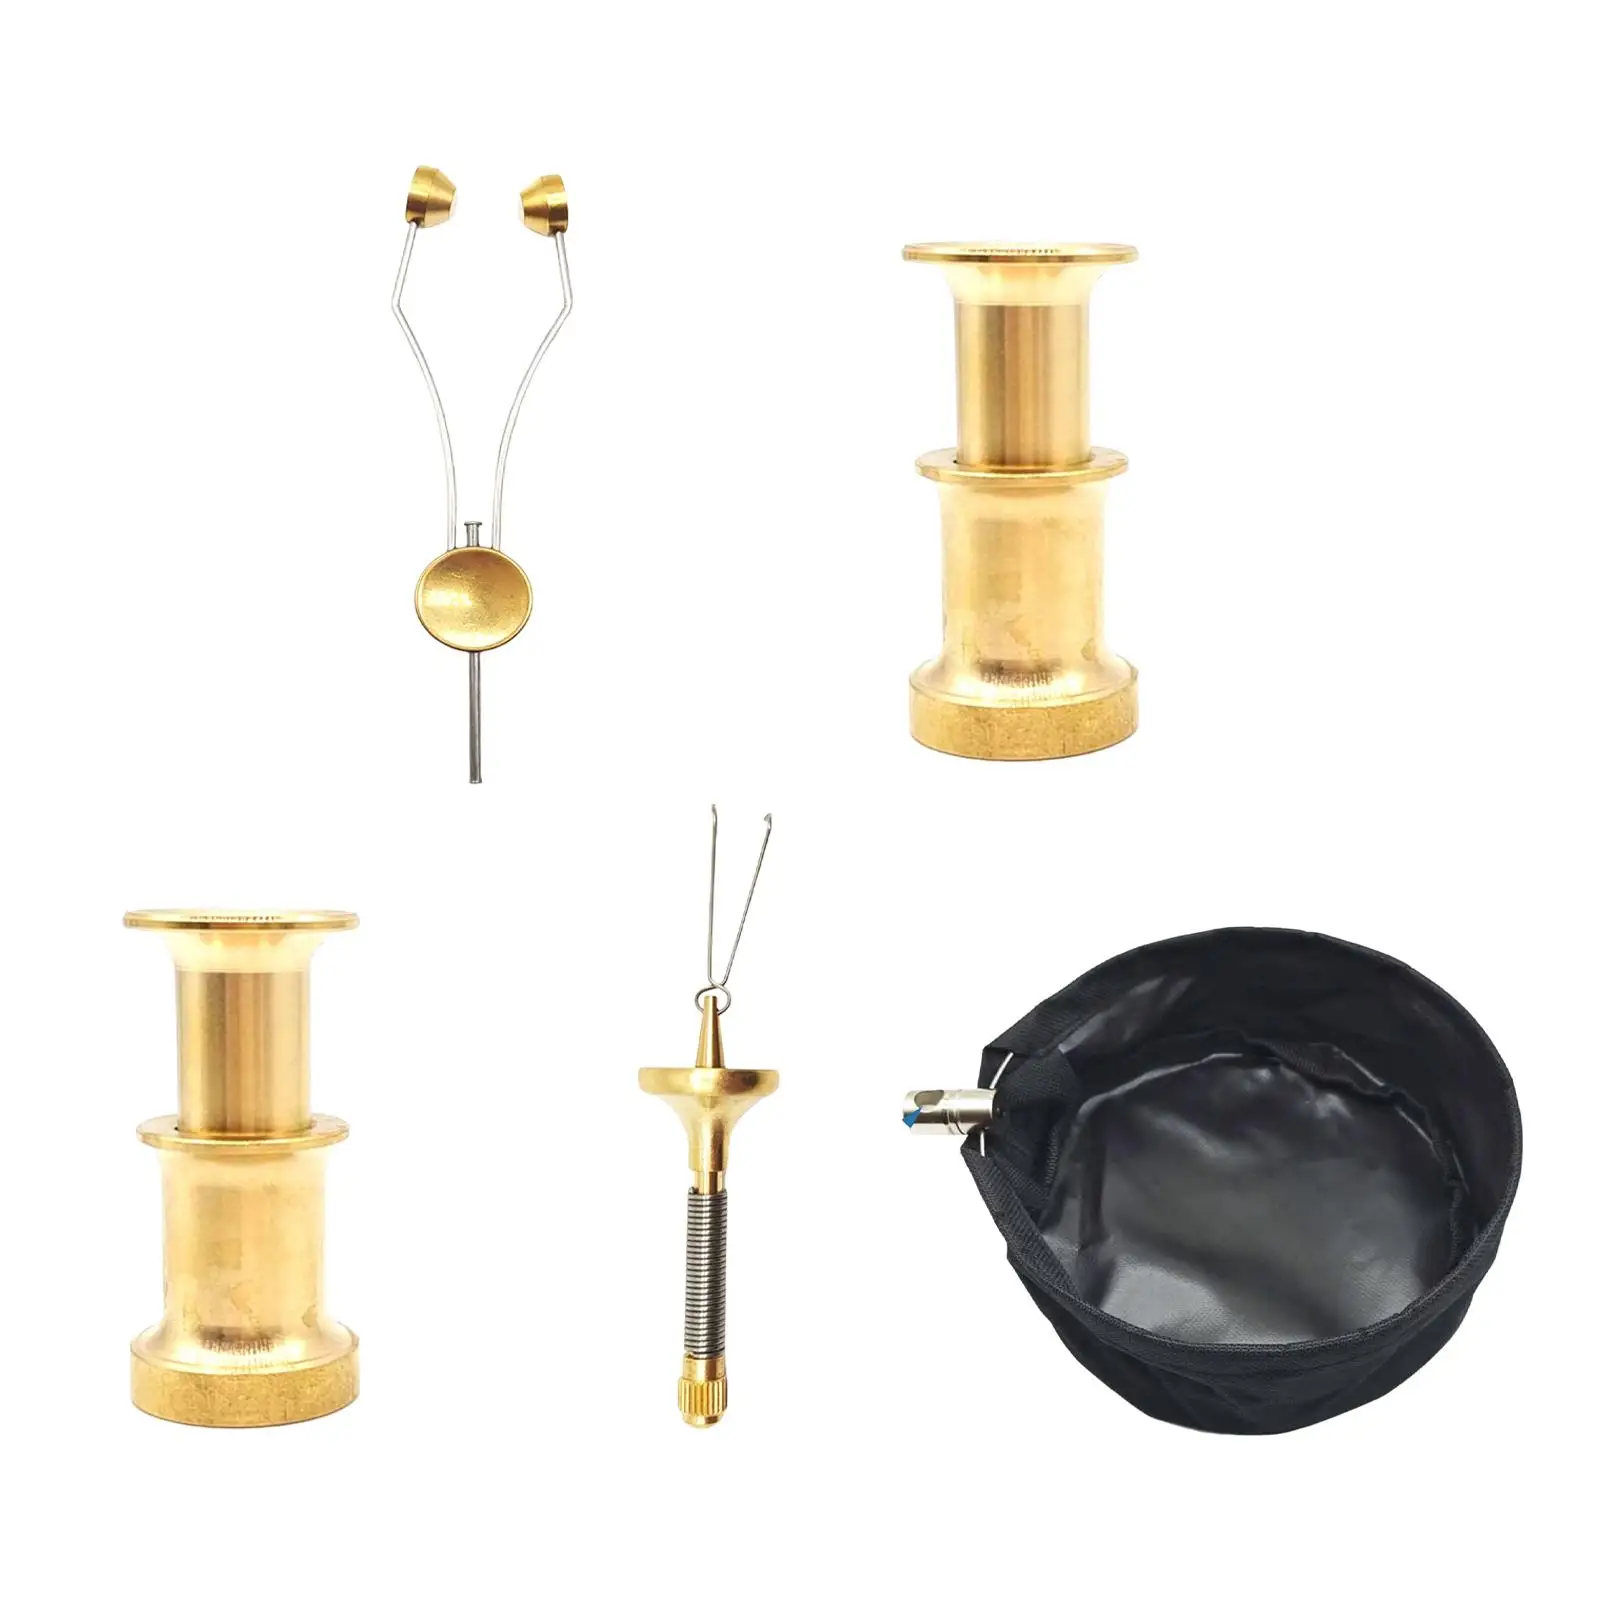 Fishing  Tools for Fly Tying Vise Fly Tying Equipment Brass Fly Fishing